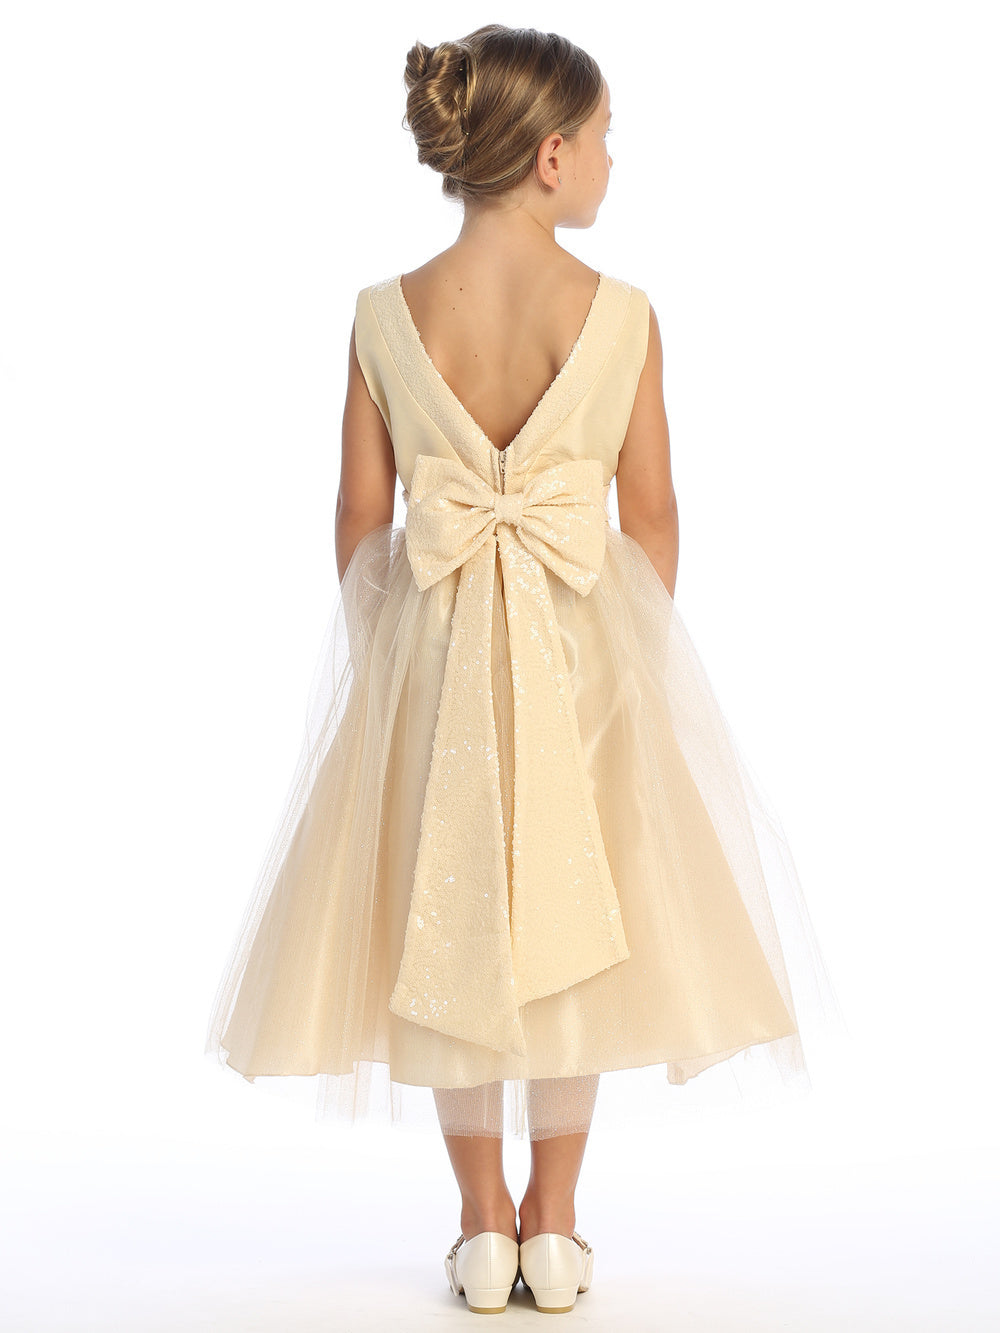 Champagne-hued shantung and tulle dress twinkles with sequins on a flower girl.